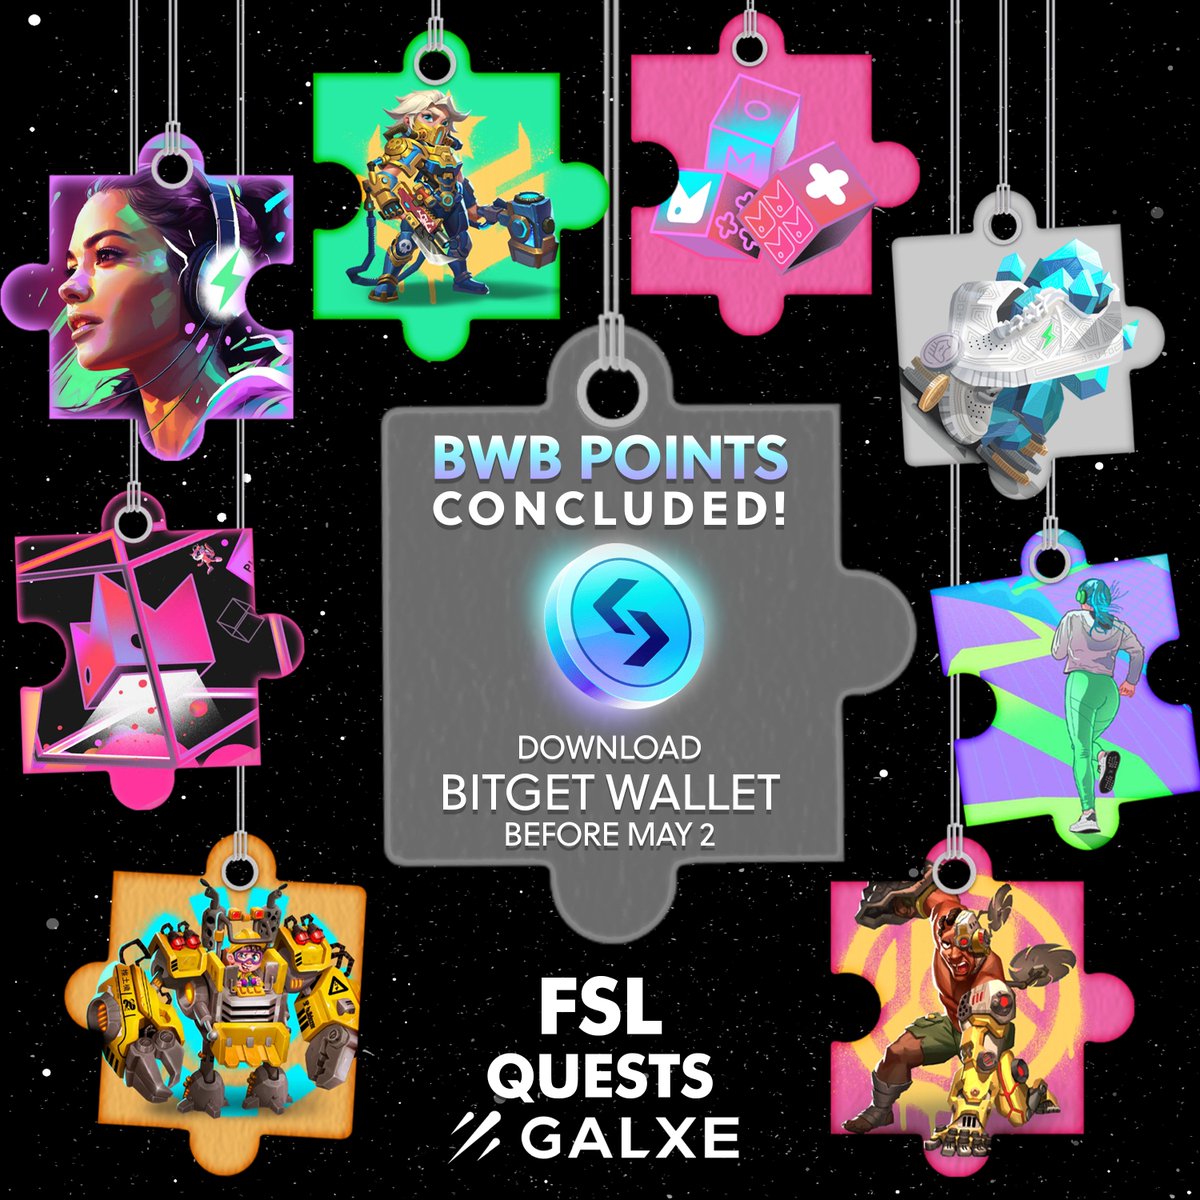 Thank you to everyone who participated in our #Galxe event with @BitgetWallet! 🧩 🥳 BWB points collection officially ended yesterday, and rewards will be sent out before May 2nd. 🚨 Important Reminder: Please ensure you download the Bitget Wallet APP before May 1st to verify…